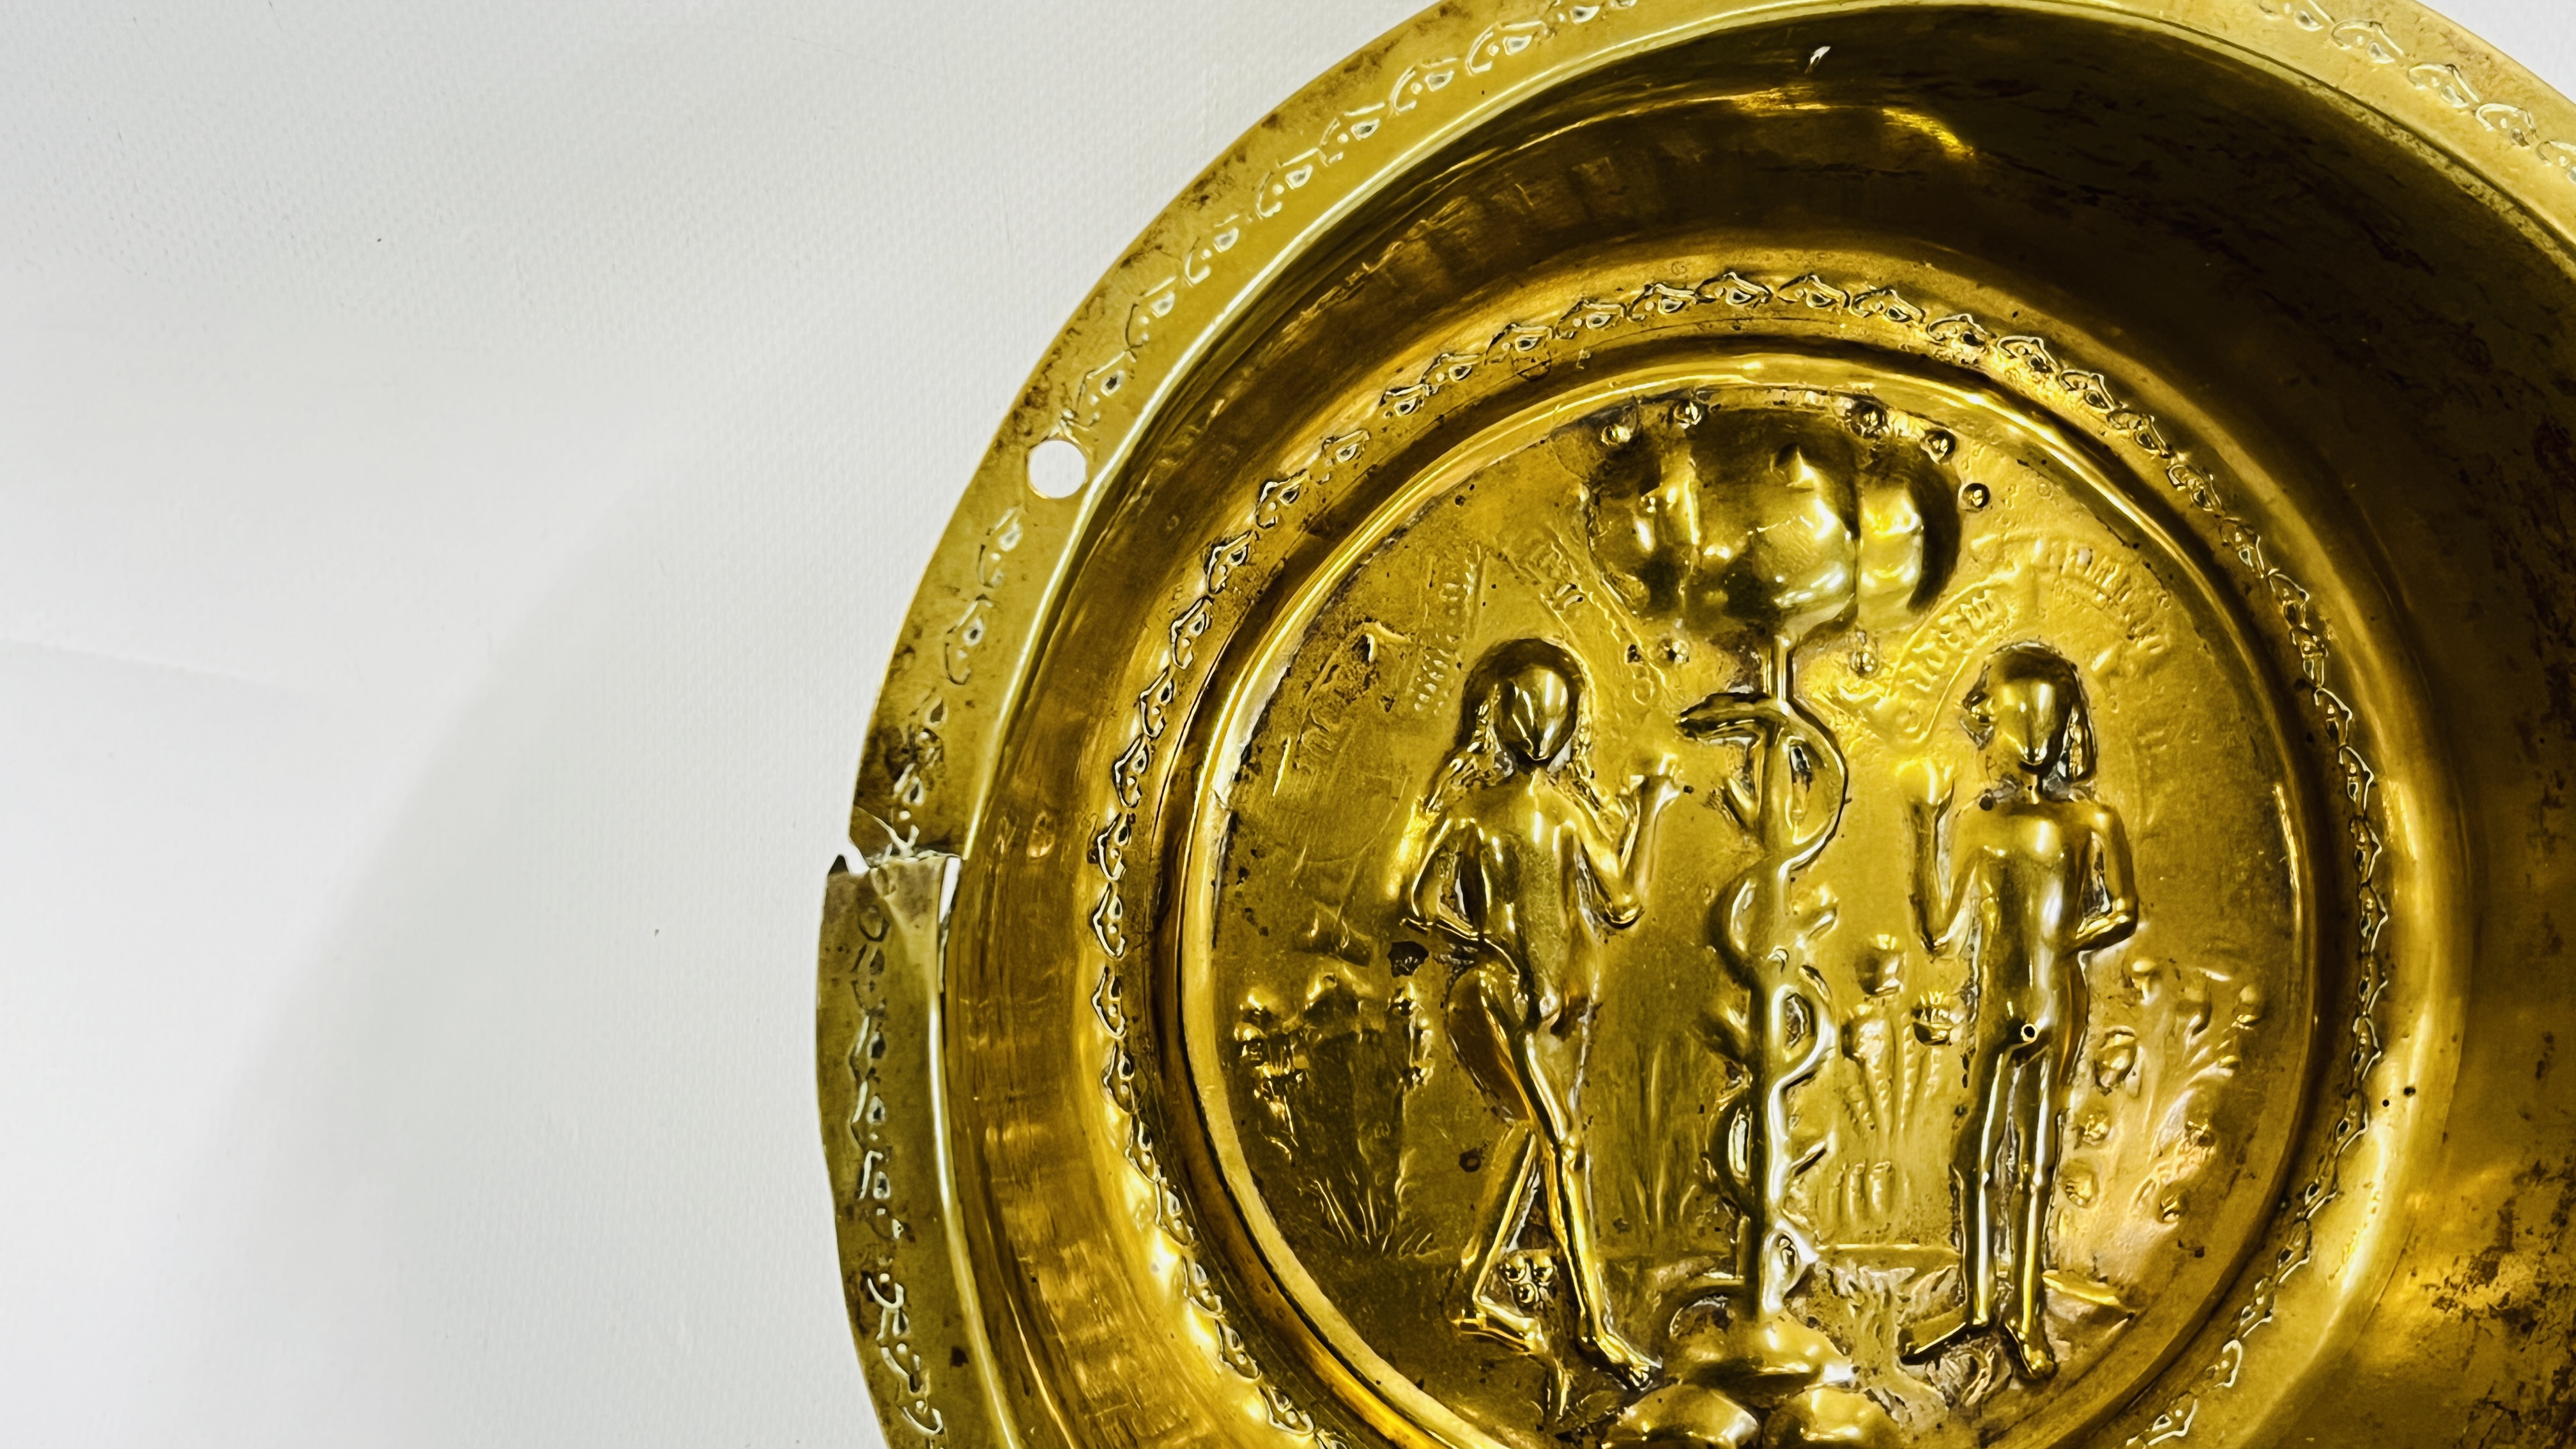 A NUREMBERG BRASS ARMS DISH EMBOSSED WITH ADAM & EVE (SOME DAMAGE) DIAM 24. - Image 2 of 6